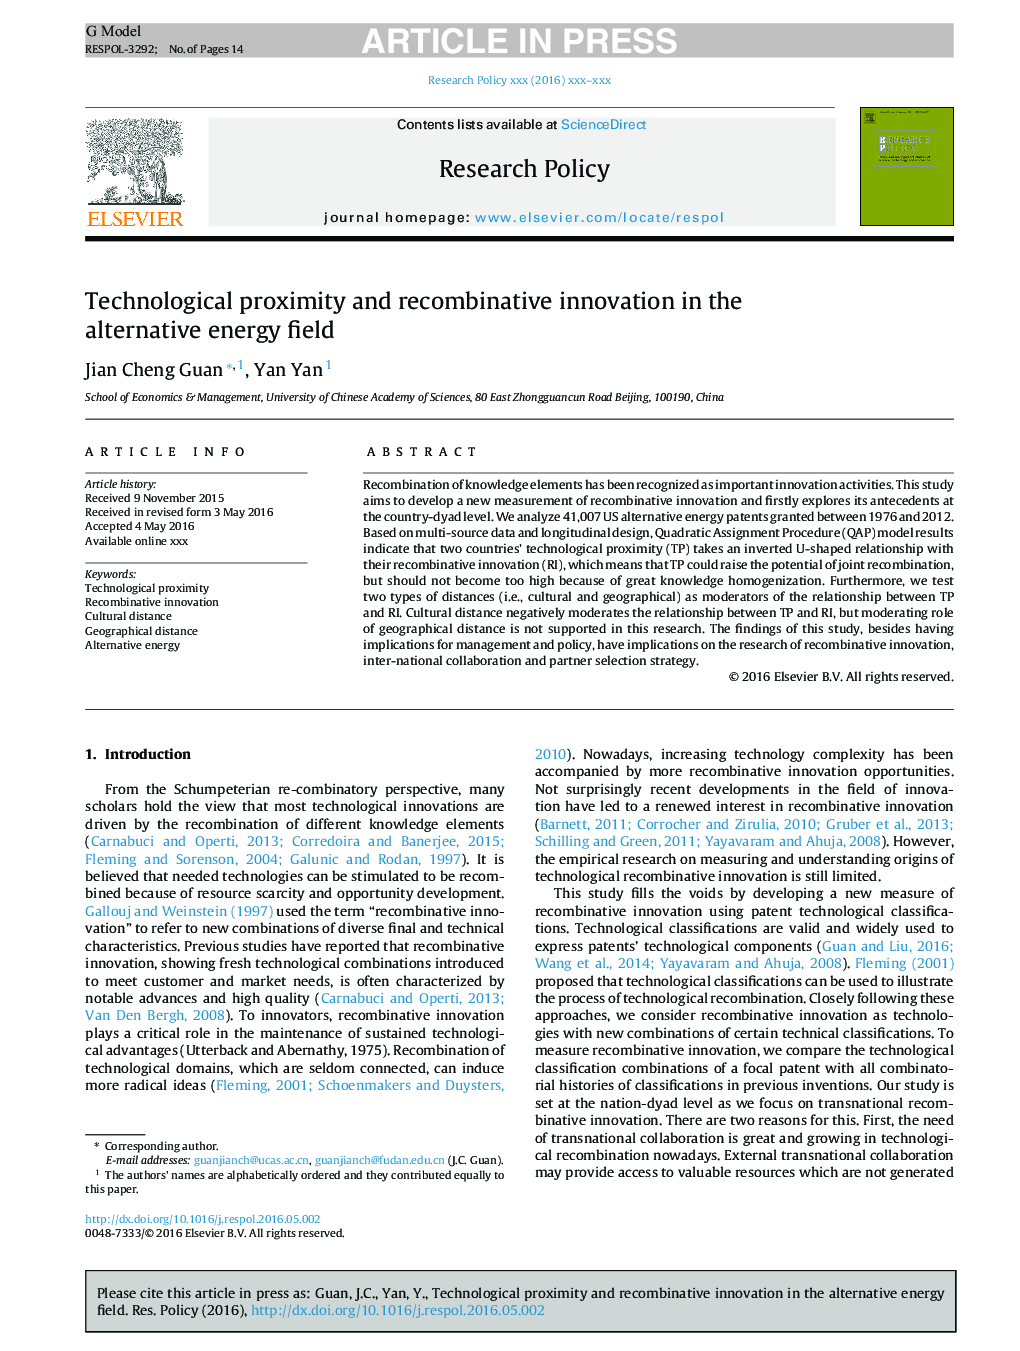 Technological proximity and recombinative innovation in the alternative energy field